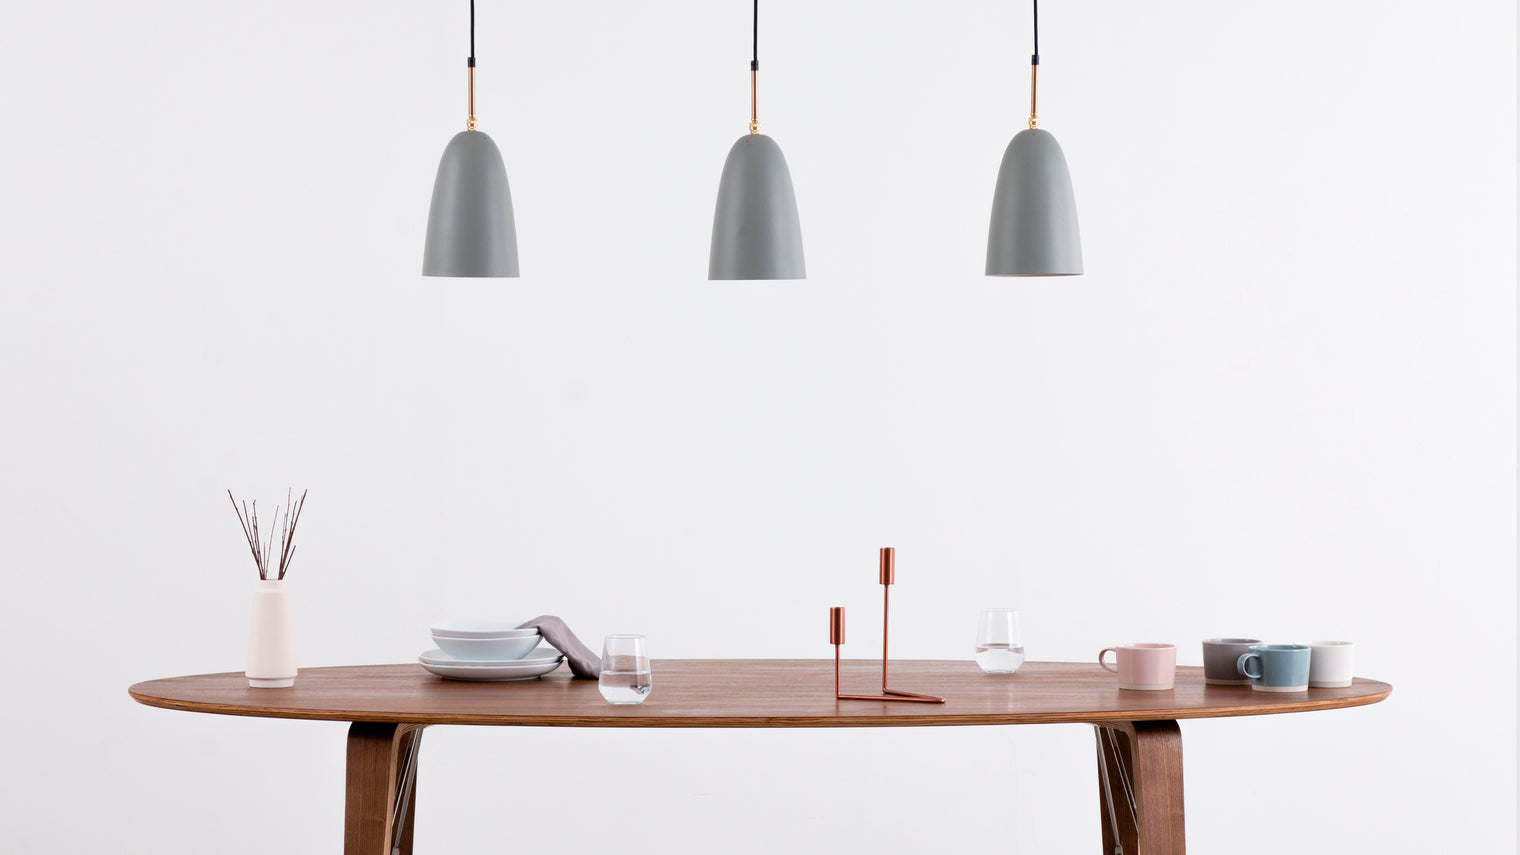 SLEEK STEEL CONSTRUCTION | Utilizing hardwearing steel to create this industrial suspension-style lighting solution, the Cicada Pendant Lamp is built to last.
